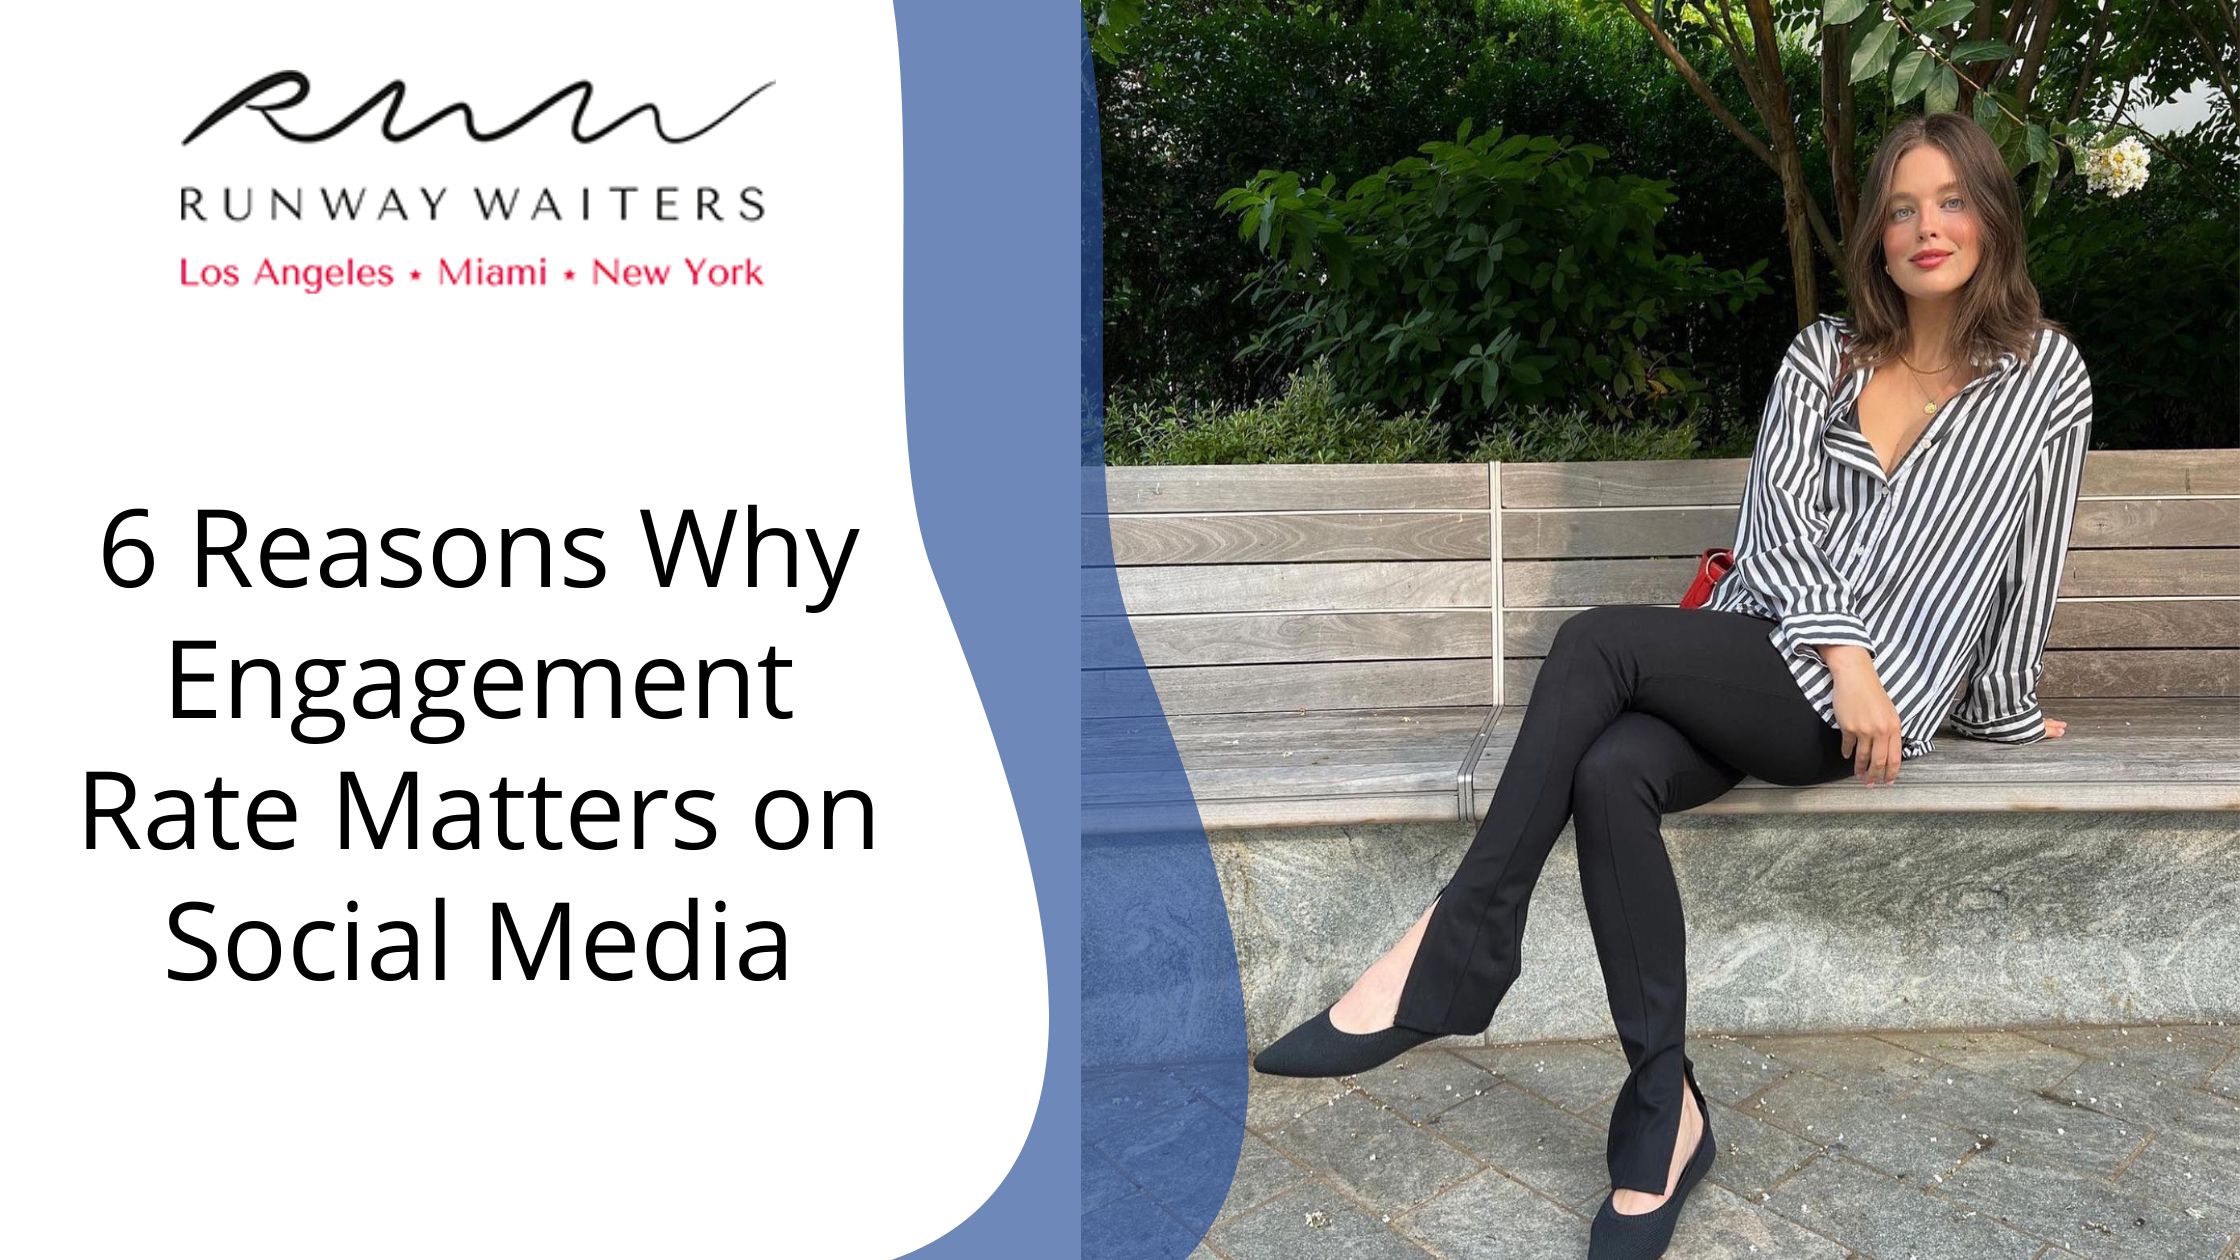 6 Reasons Why Engagement Rate Matters on Social Media